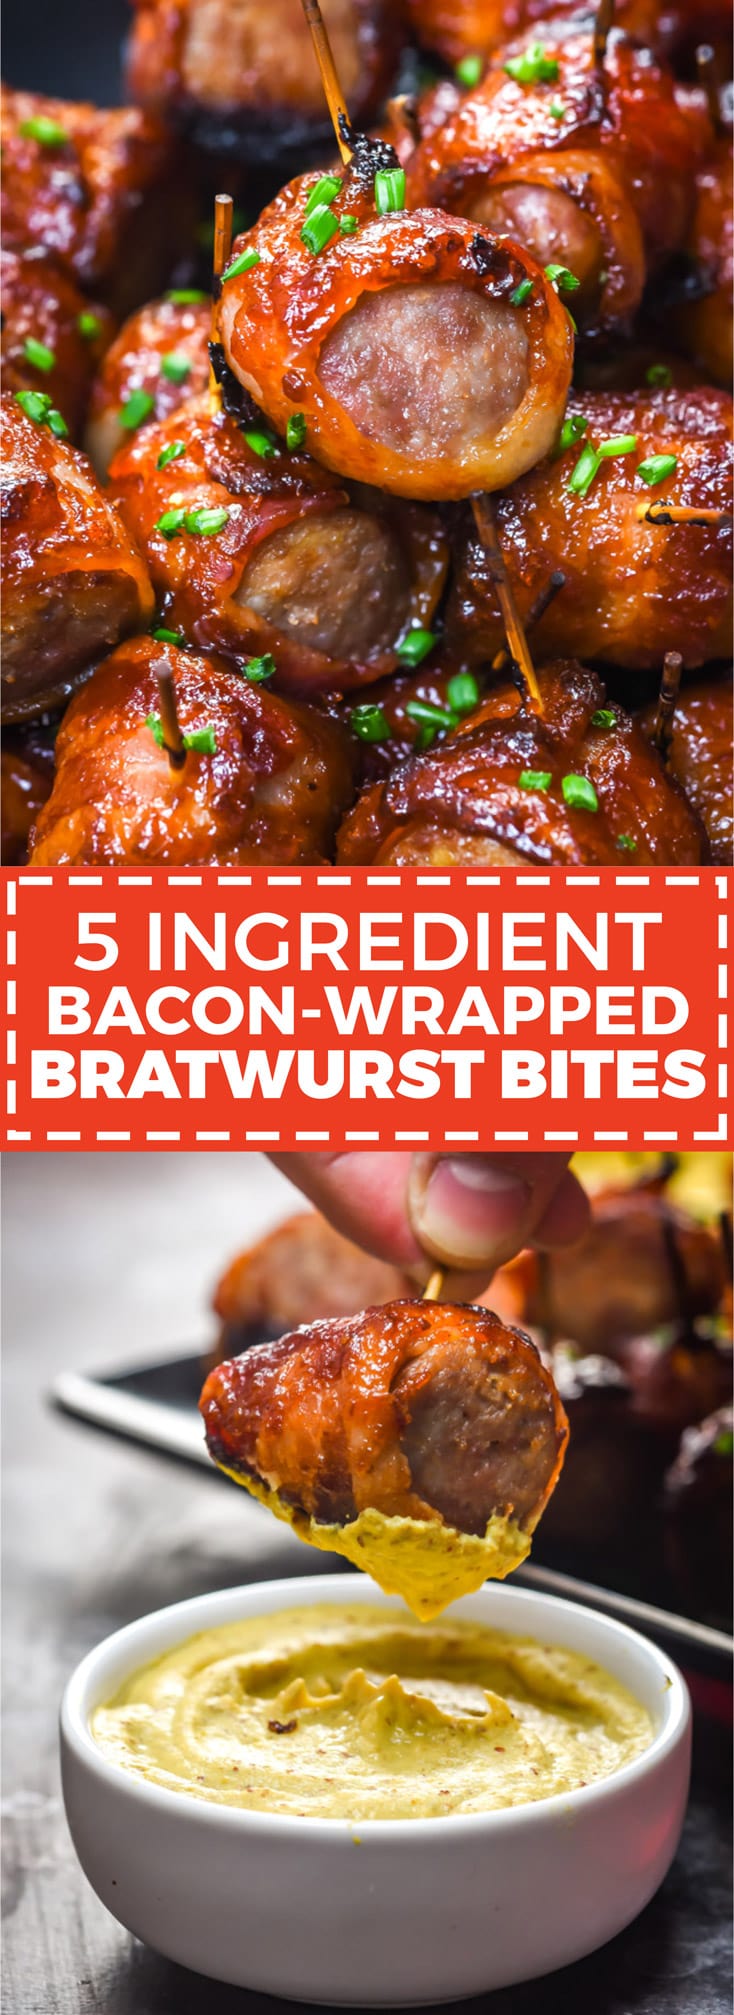 5 Ingredient Bacon-Wrapped Bratwurst Bites. Just wait til you see how easy these sweet, spicy, smoky appetizer bites are to make! | hostthetoast.com